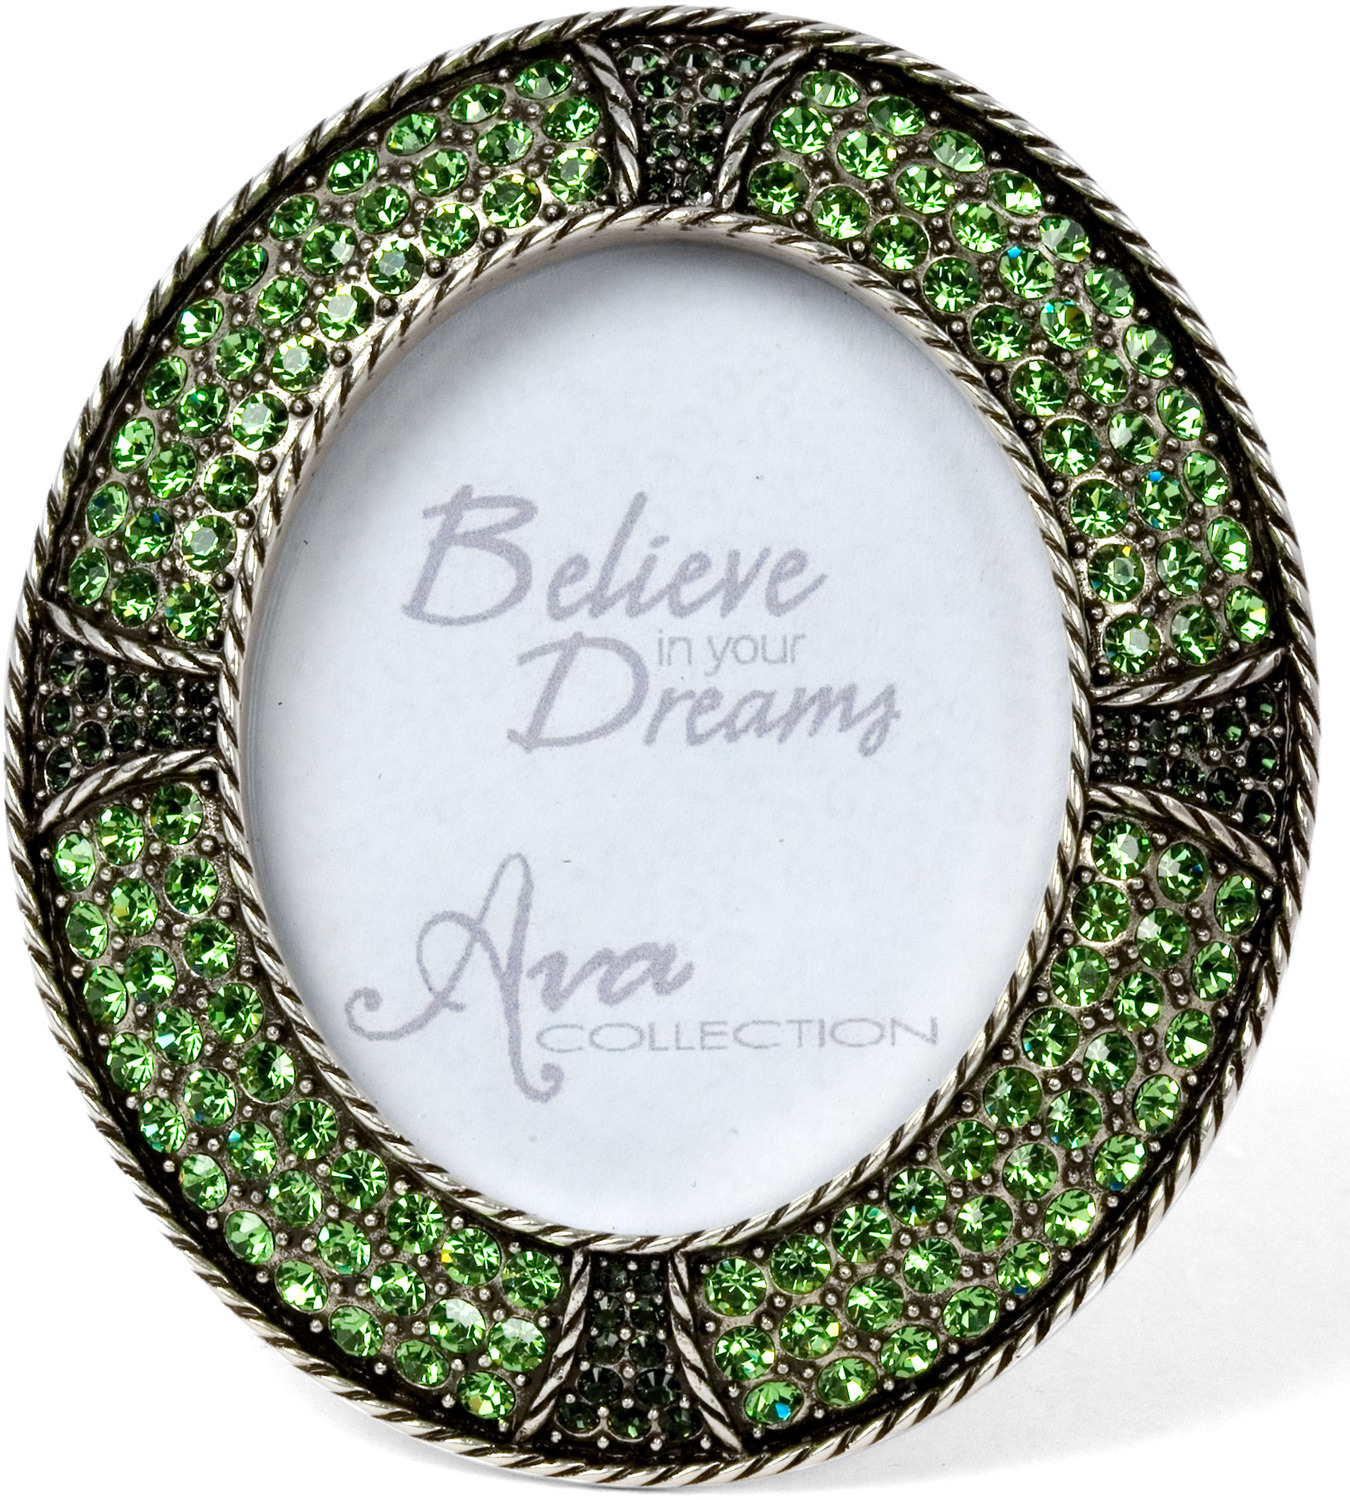 Peridot Green Oval Frame by Ava Collection - Peridot Green Oval Frame - Peridot Green Frame with Gems (Holds 1.75" x 2.25" Photo)